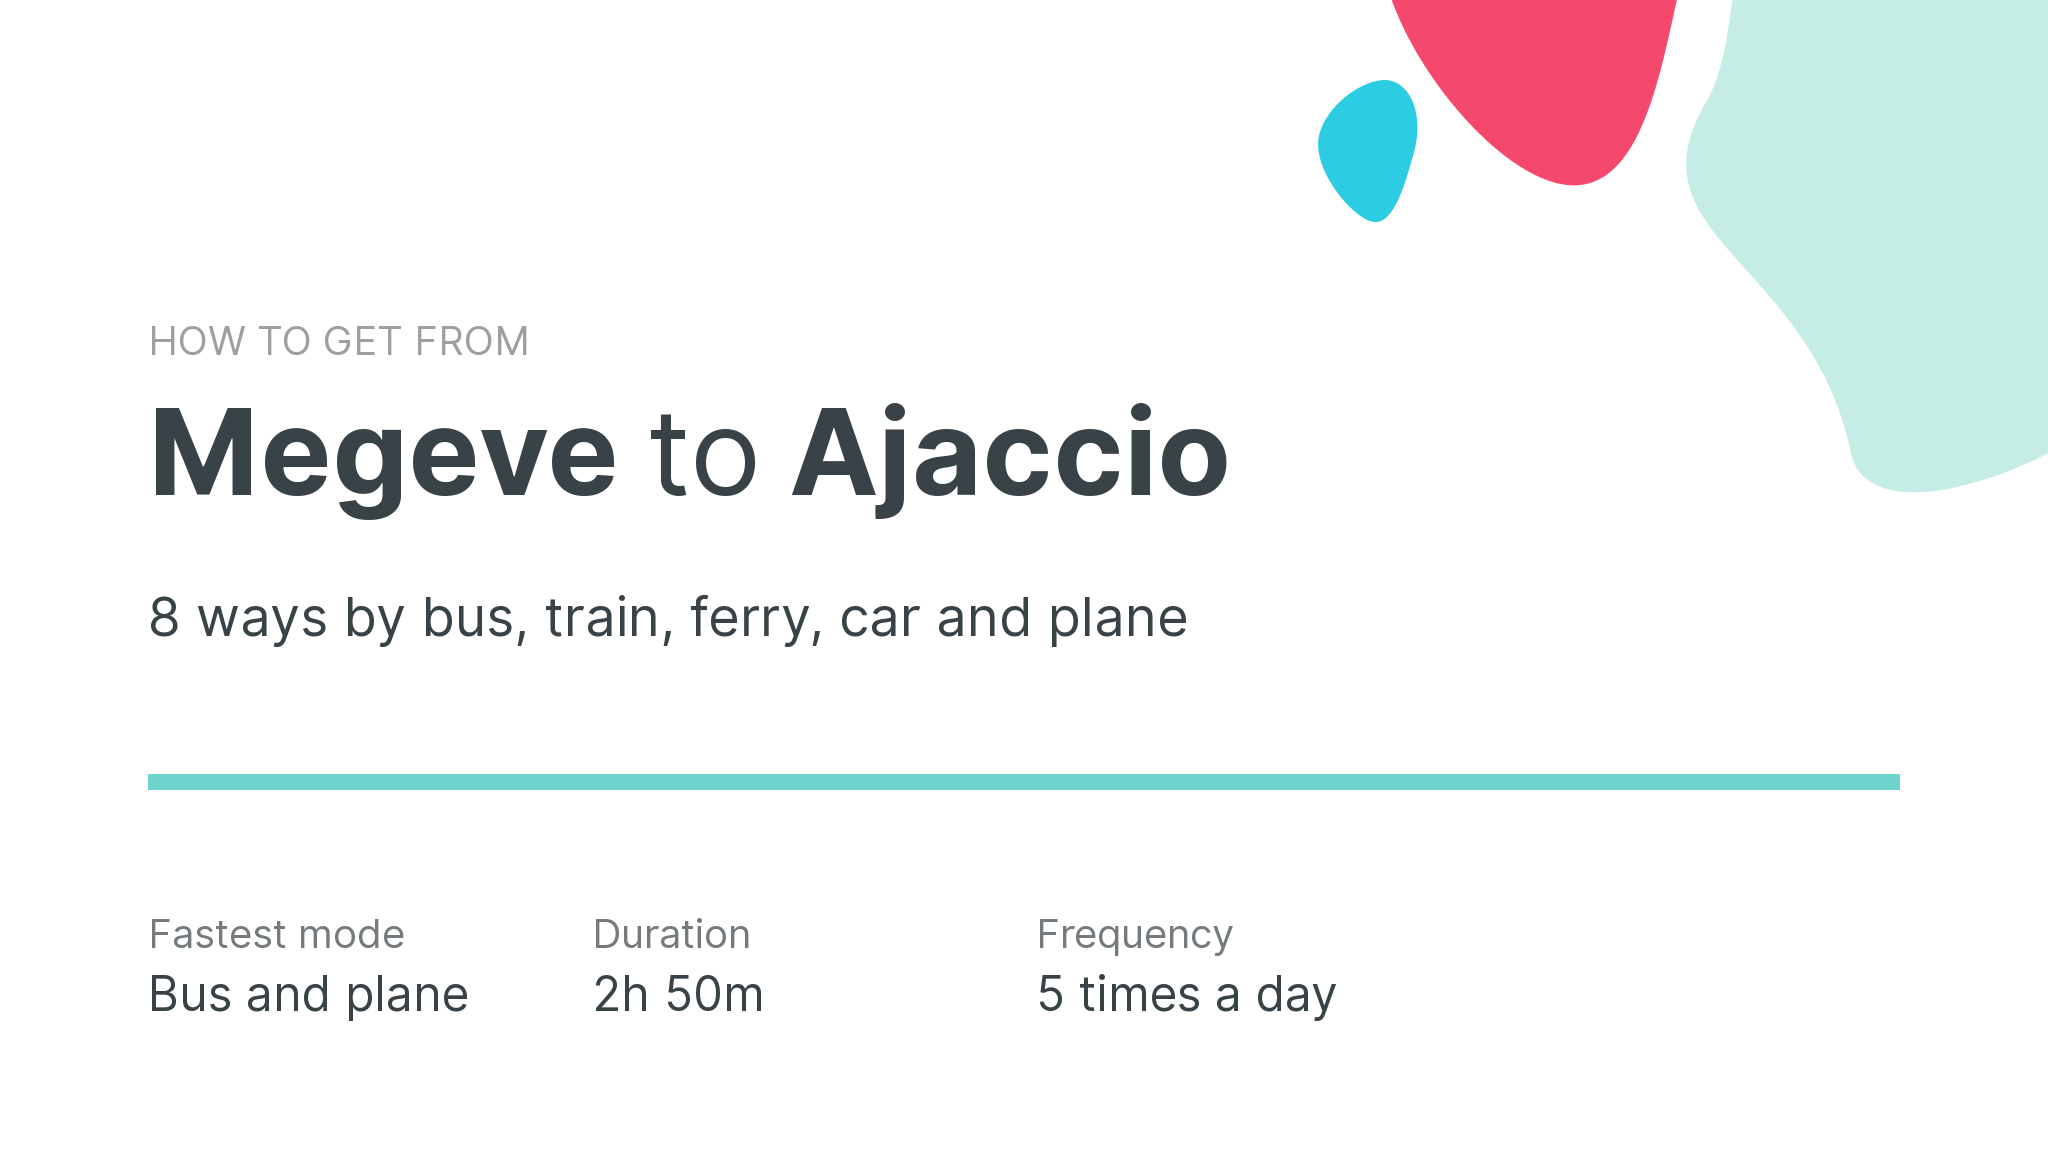 How do I get from Megeve to Ajaccio